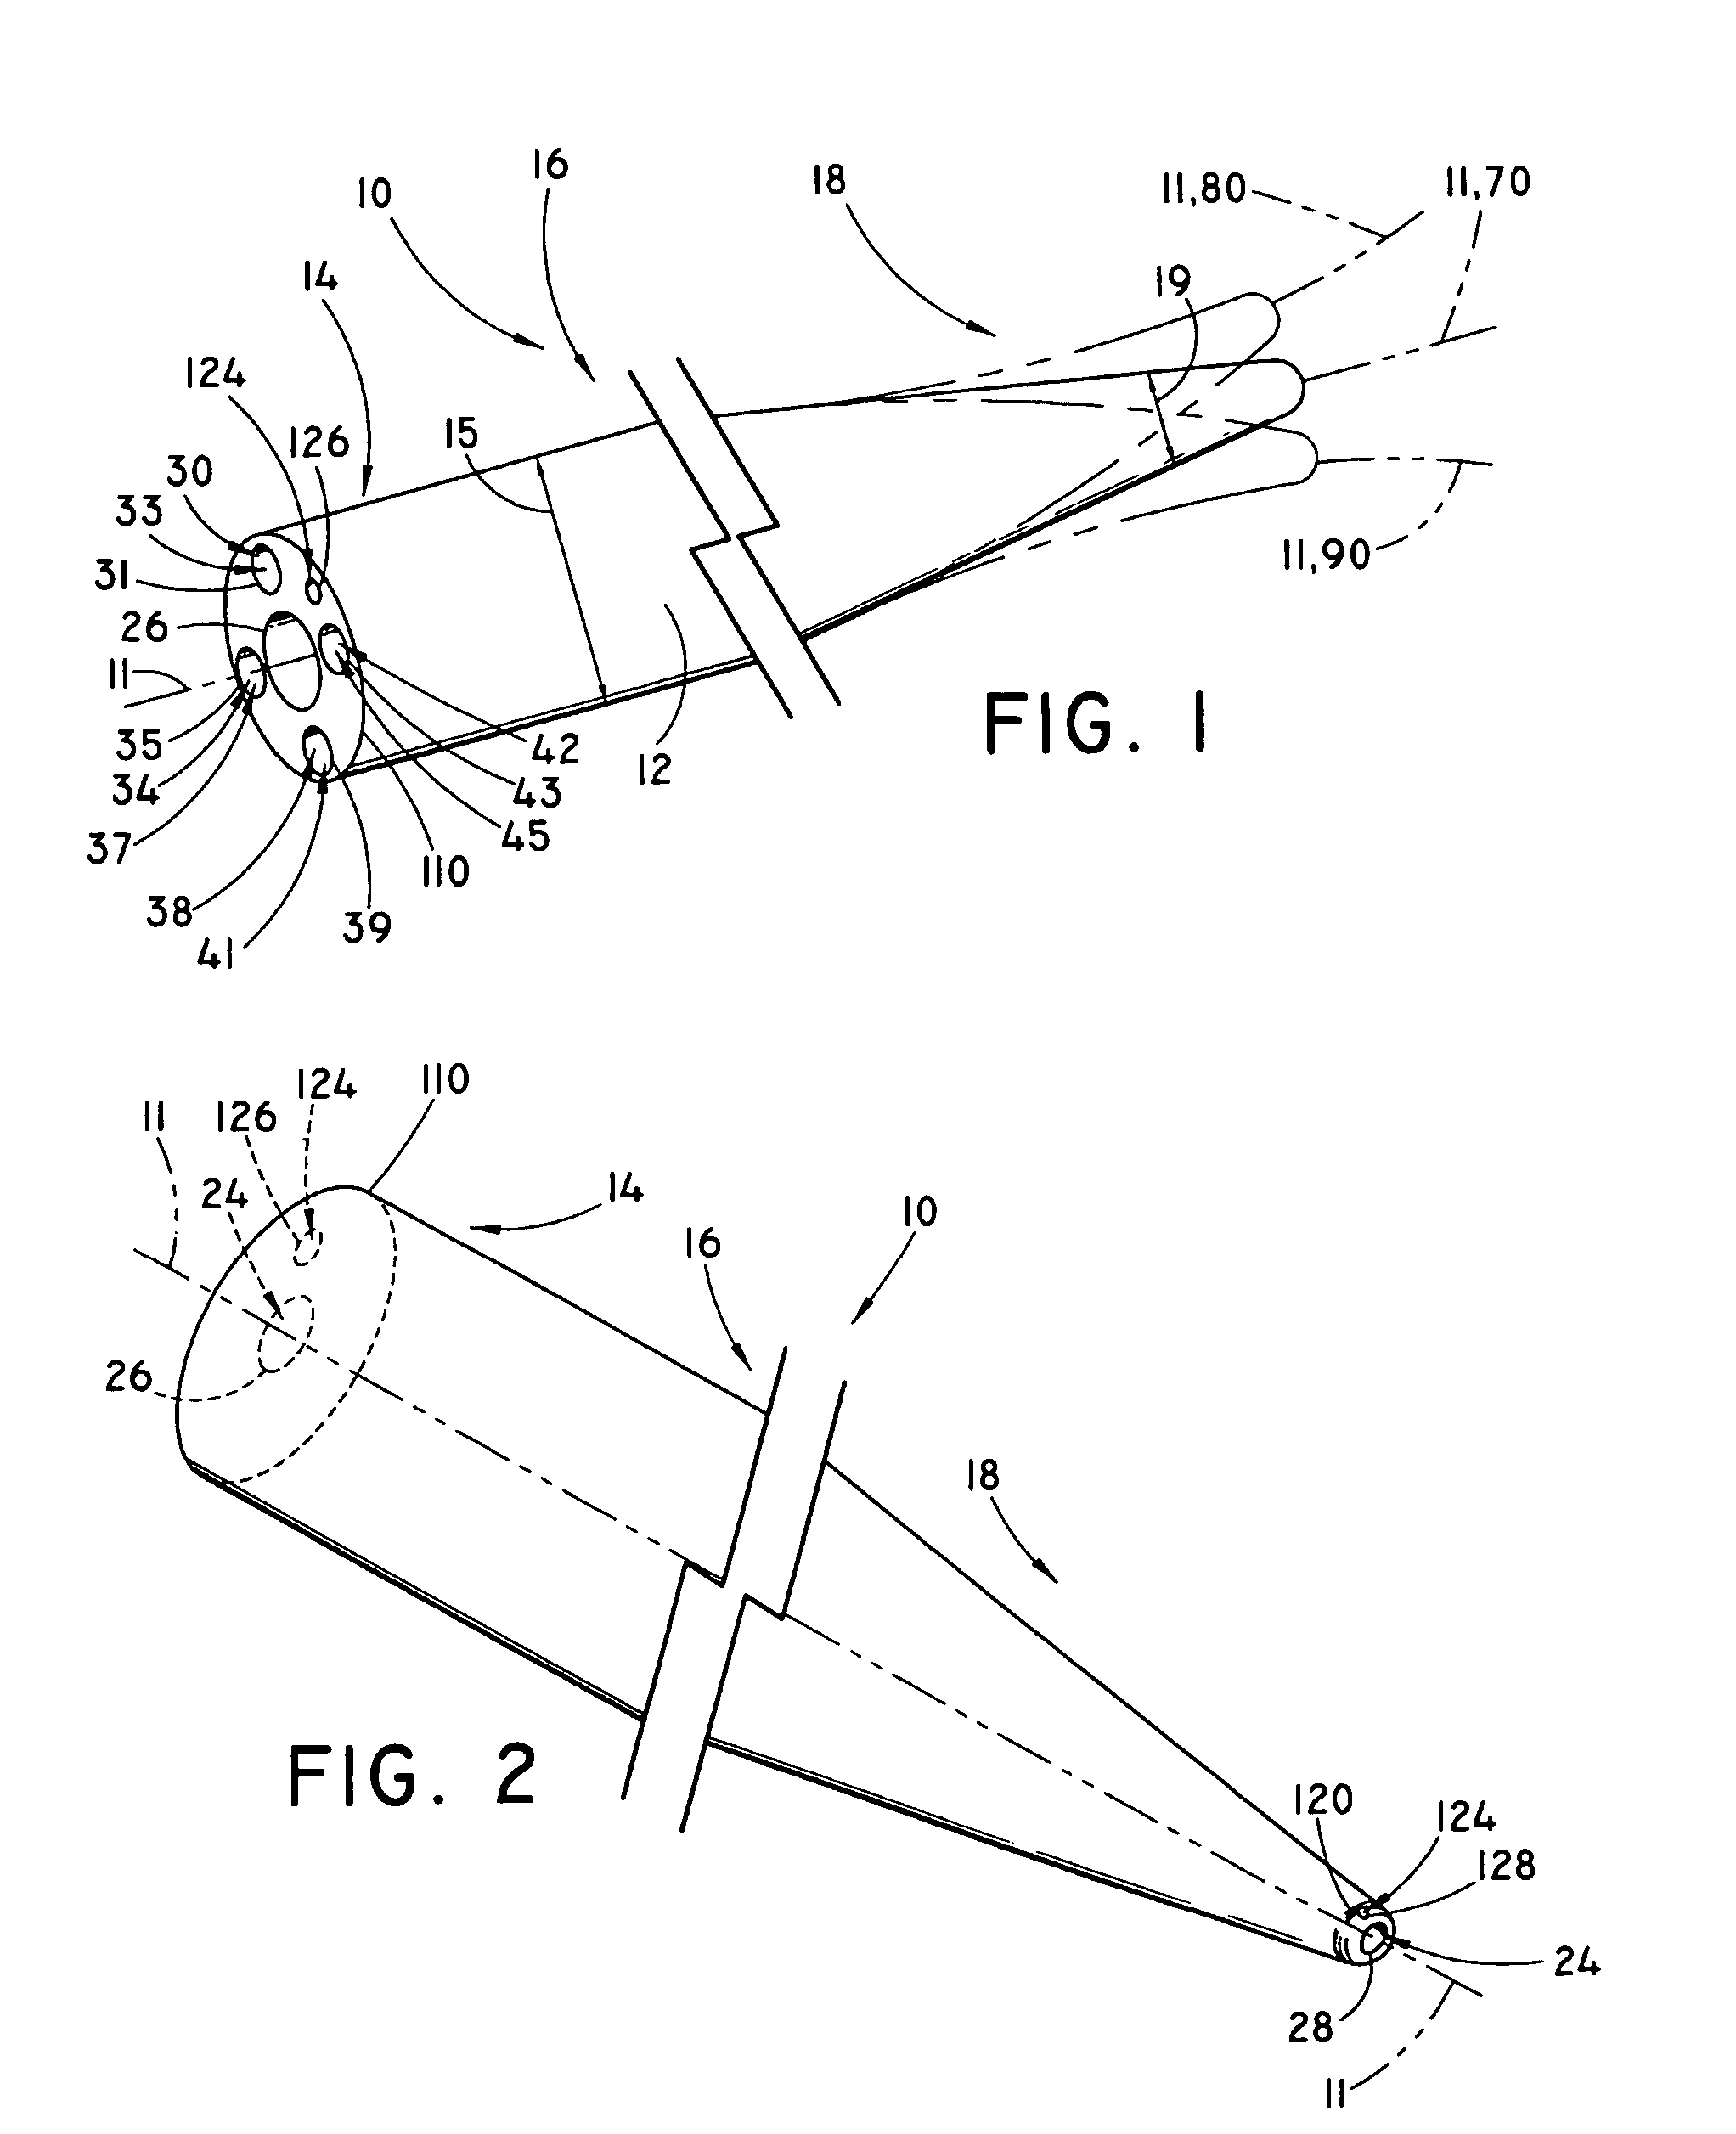 Steerable catheter devices and methods of articulating catheter devices